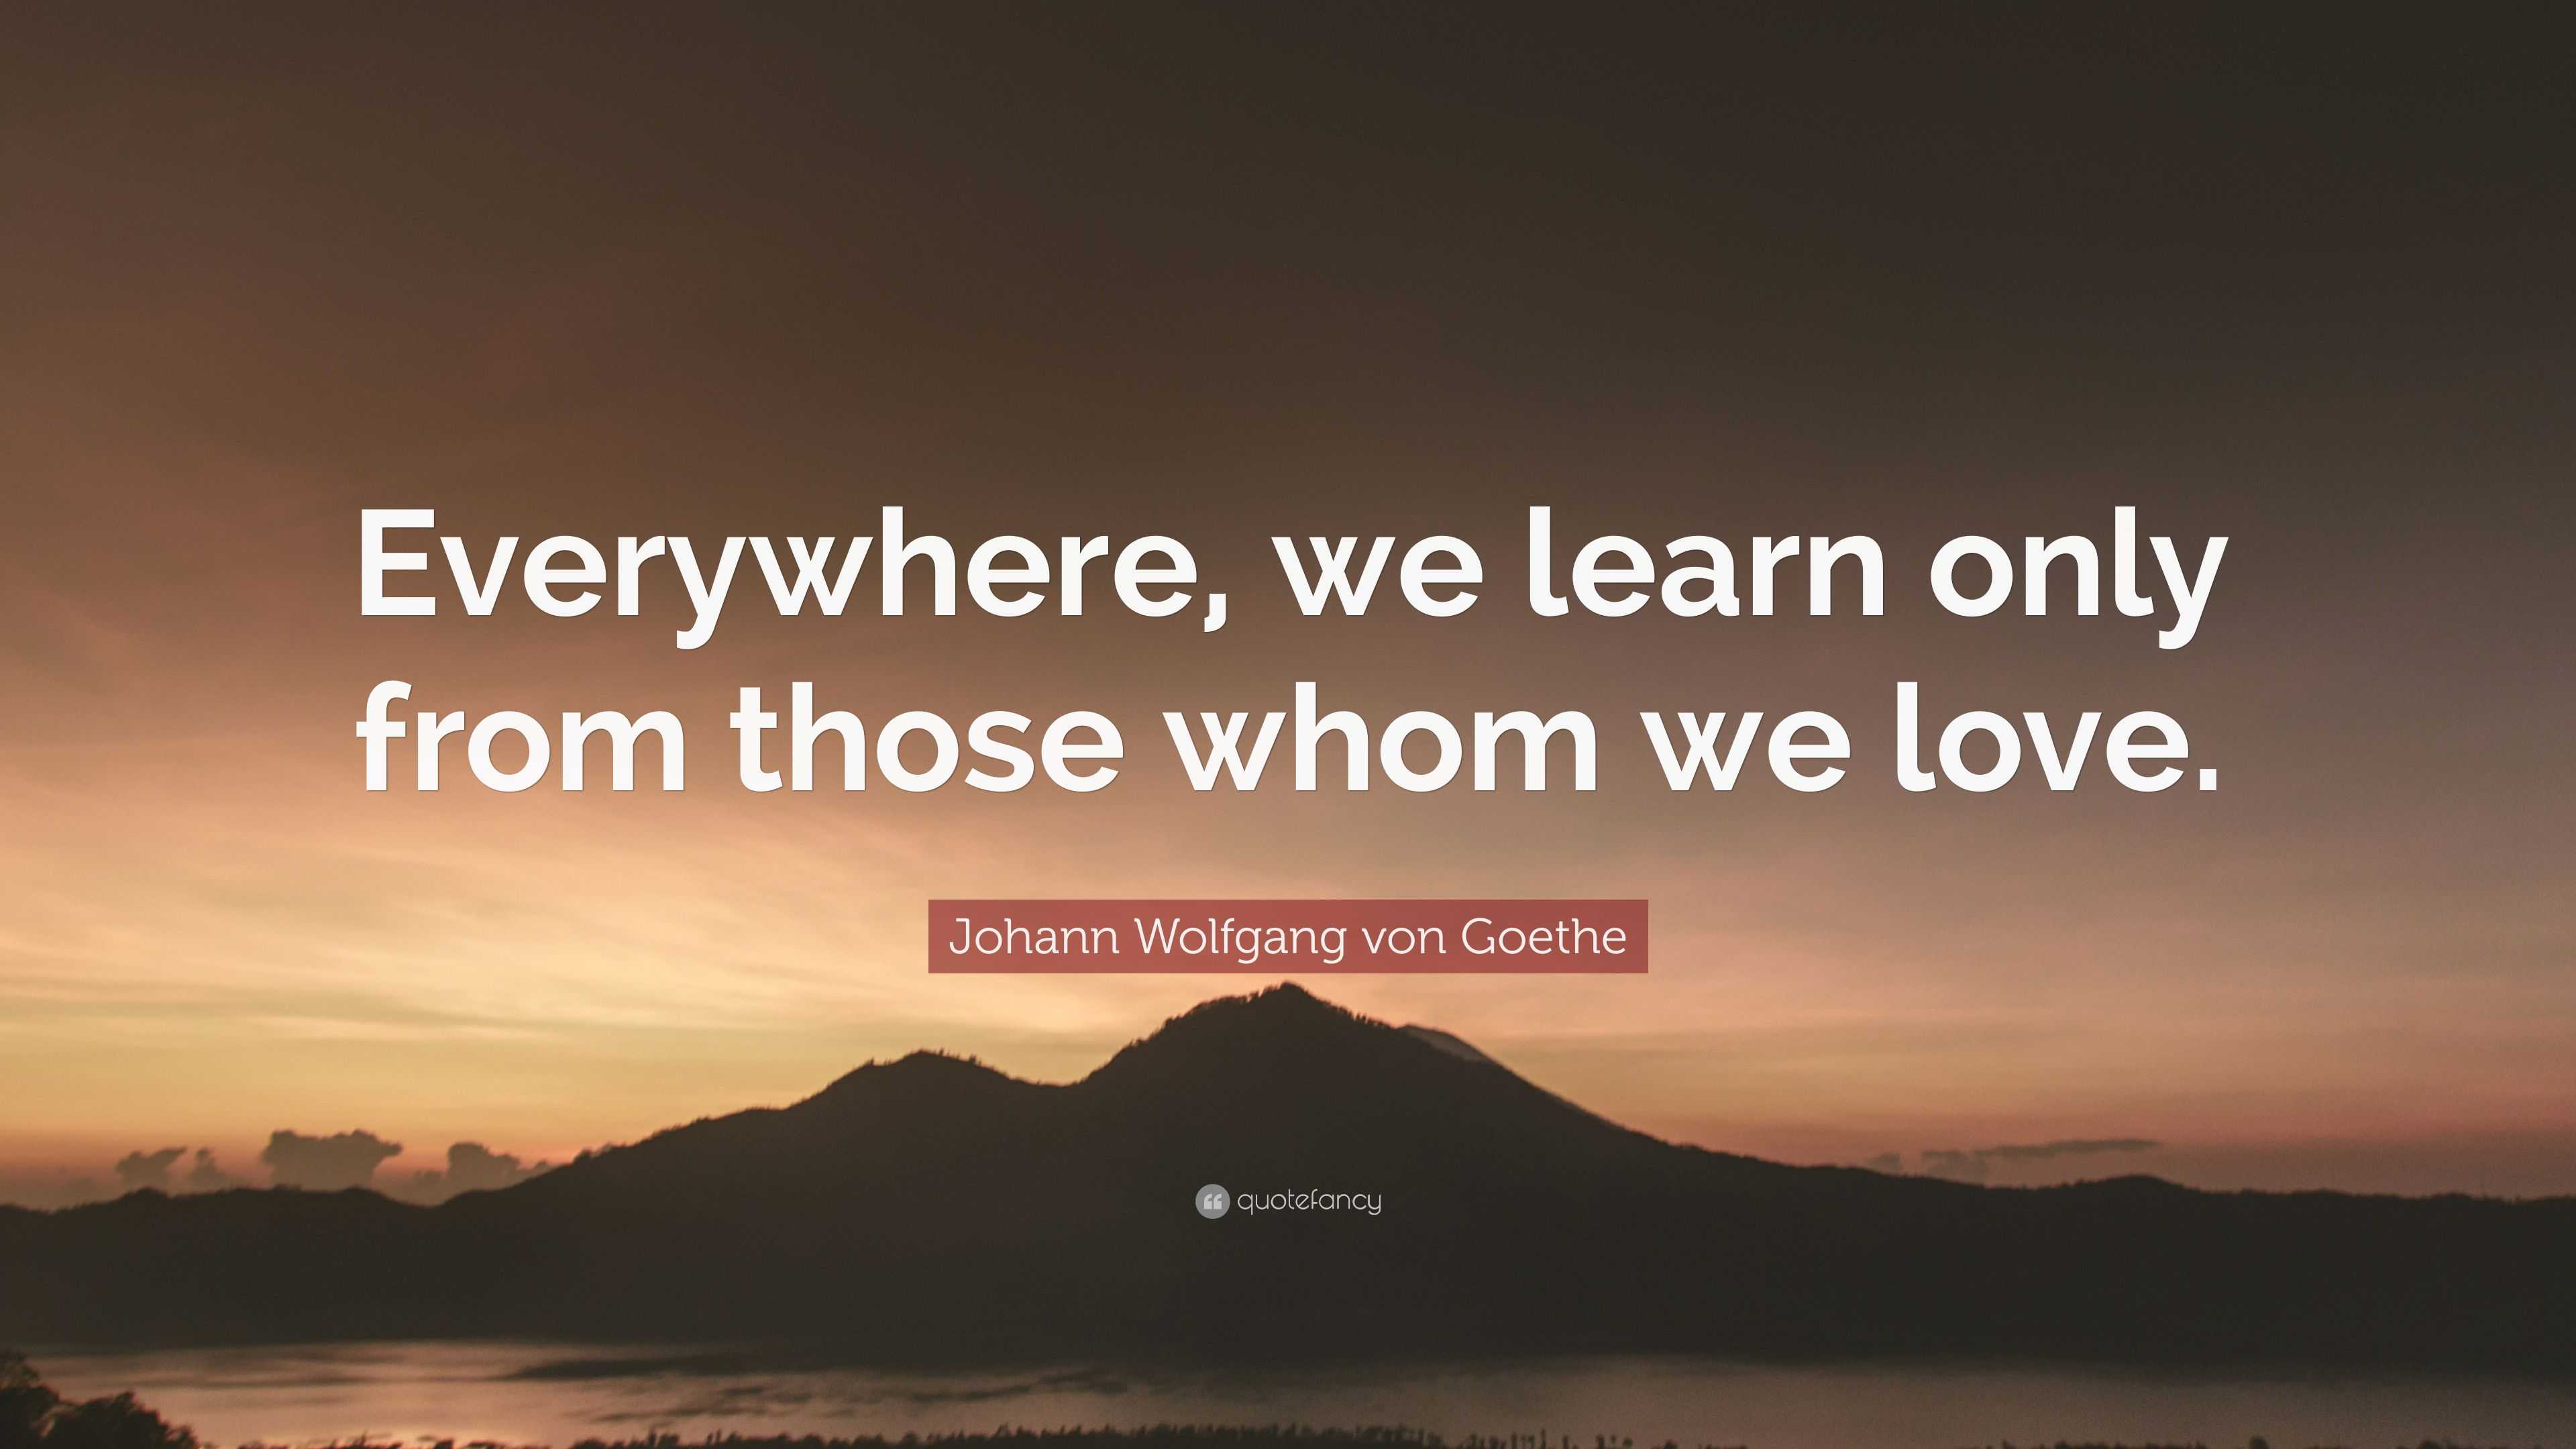 Johann Wolfgang von Goethe Quote: “I love those who yearn for the